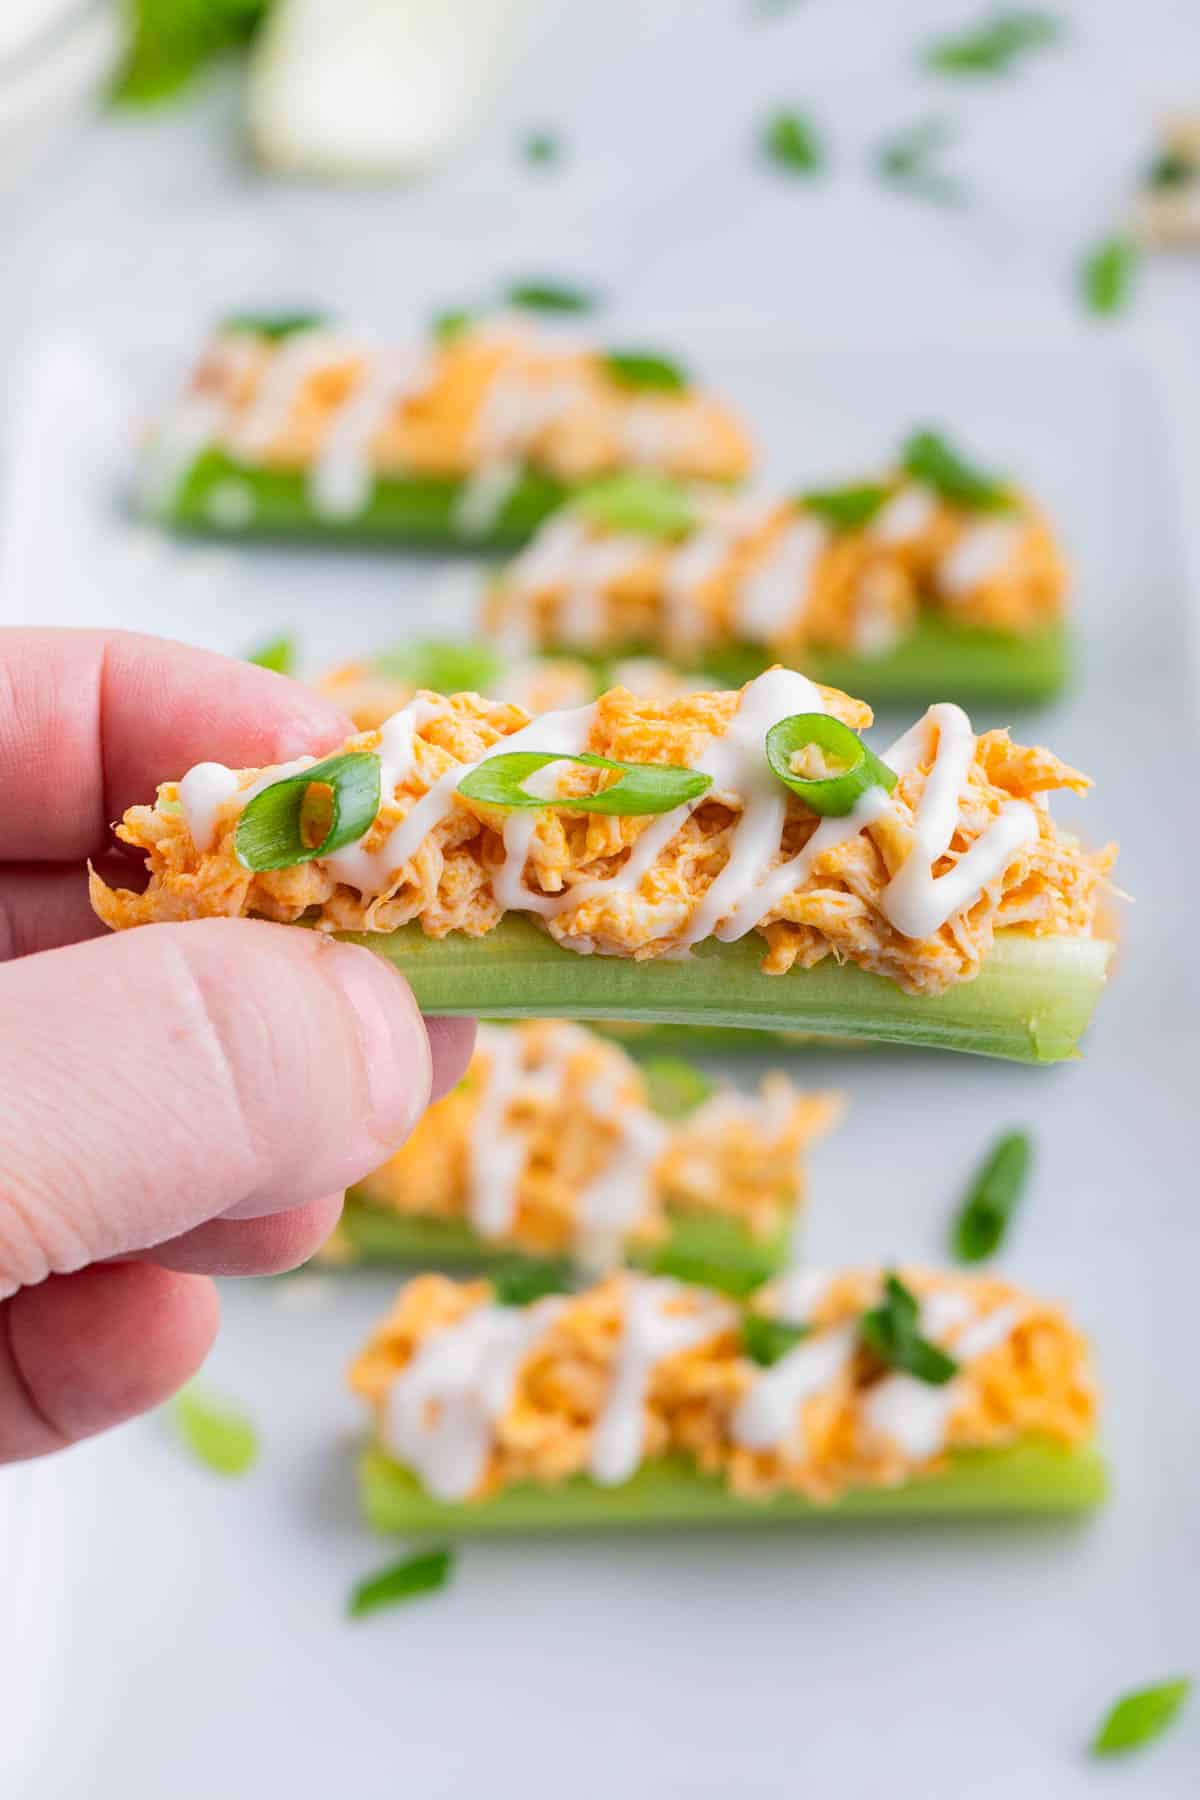 A hand holds a piece of celery filled with buffalo chicken dip.